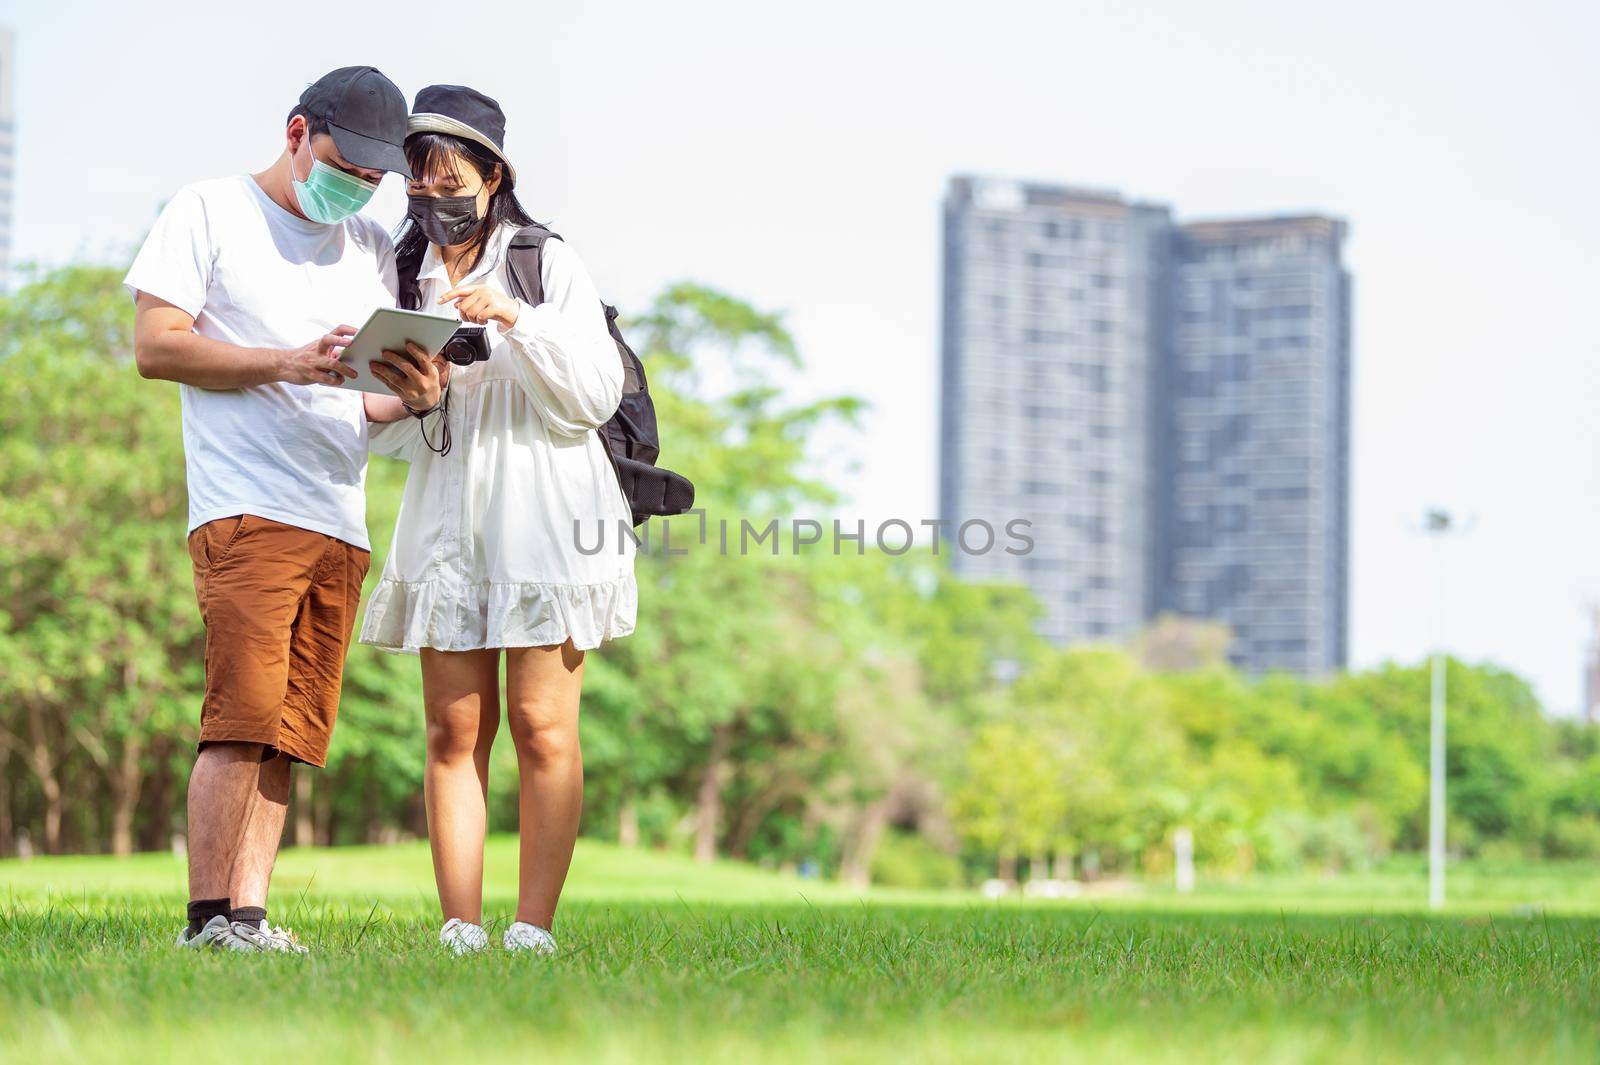 Asian couples with facial mask searching for tourist information through tablets of amazing places to visit in urban with building and park background. Technology and Travel concept. New normal theme